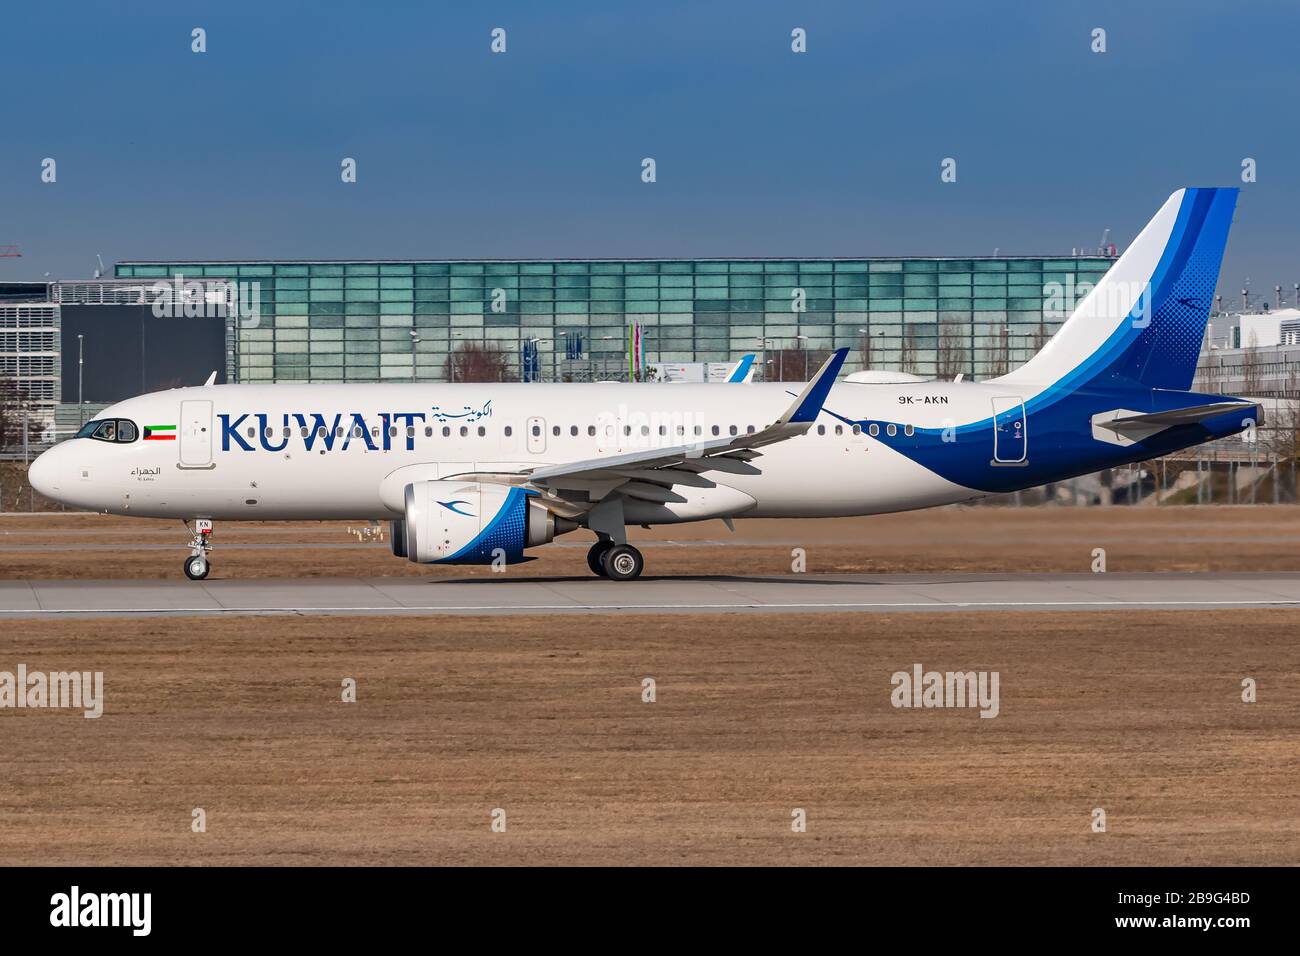 Munich, Germany - February 15, 2020: Kuwait Airways Airbus A320 Neo airplane at Munich airport (MUC) in Germany. Airbus is an aircraft manufacturer fr Stock Photo